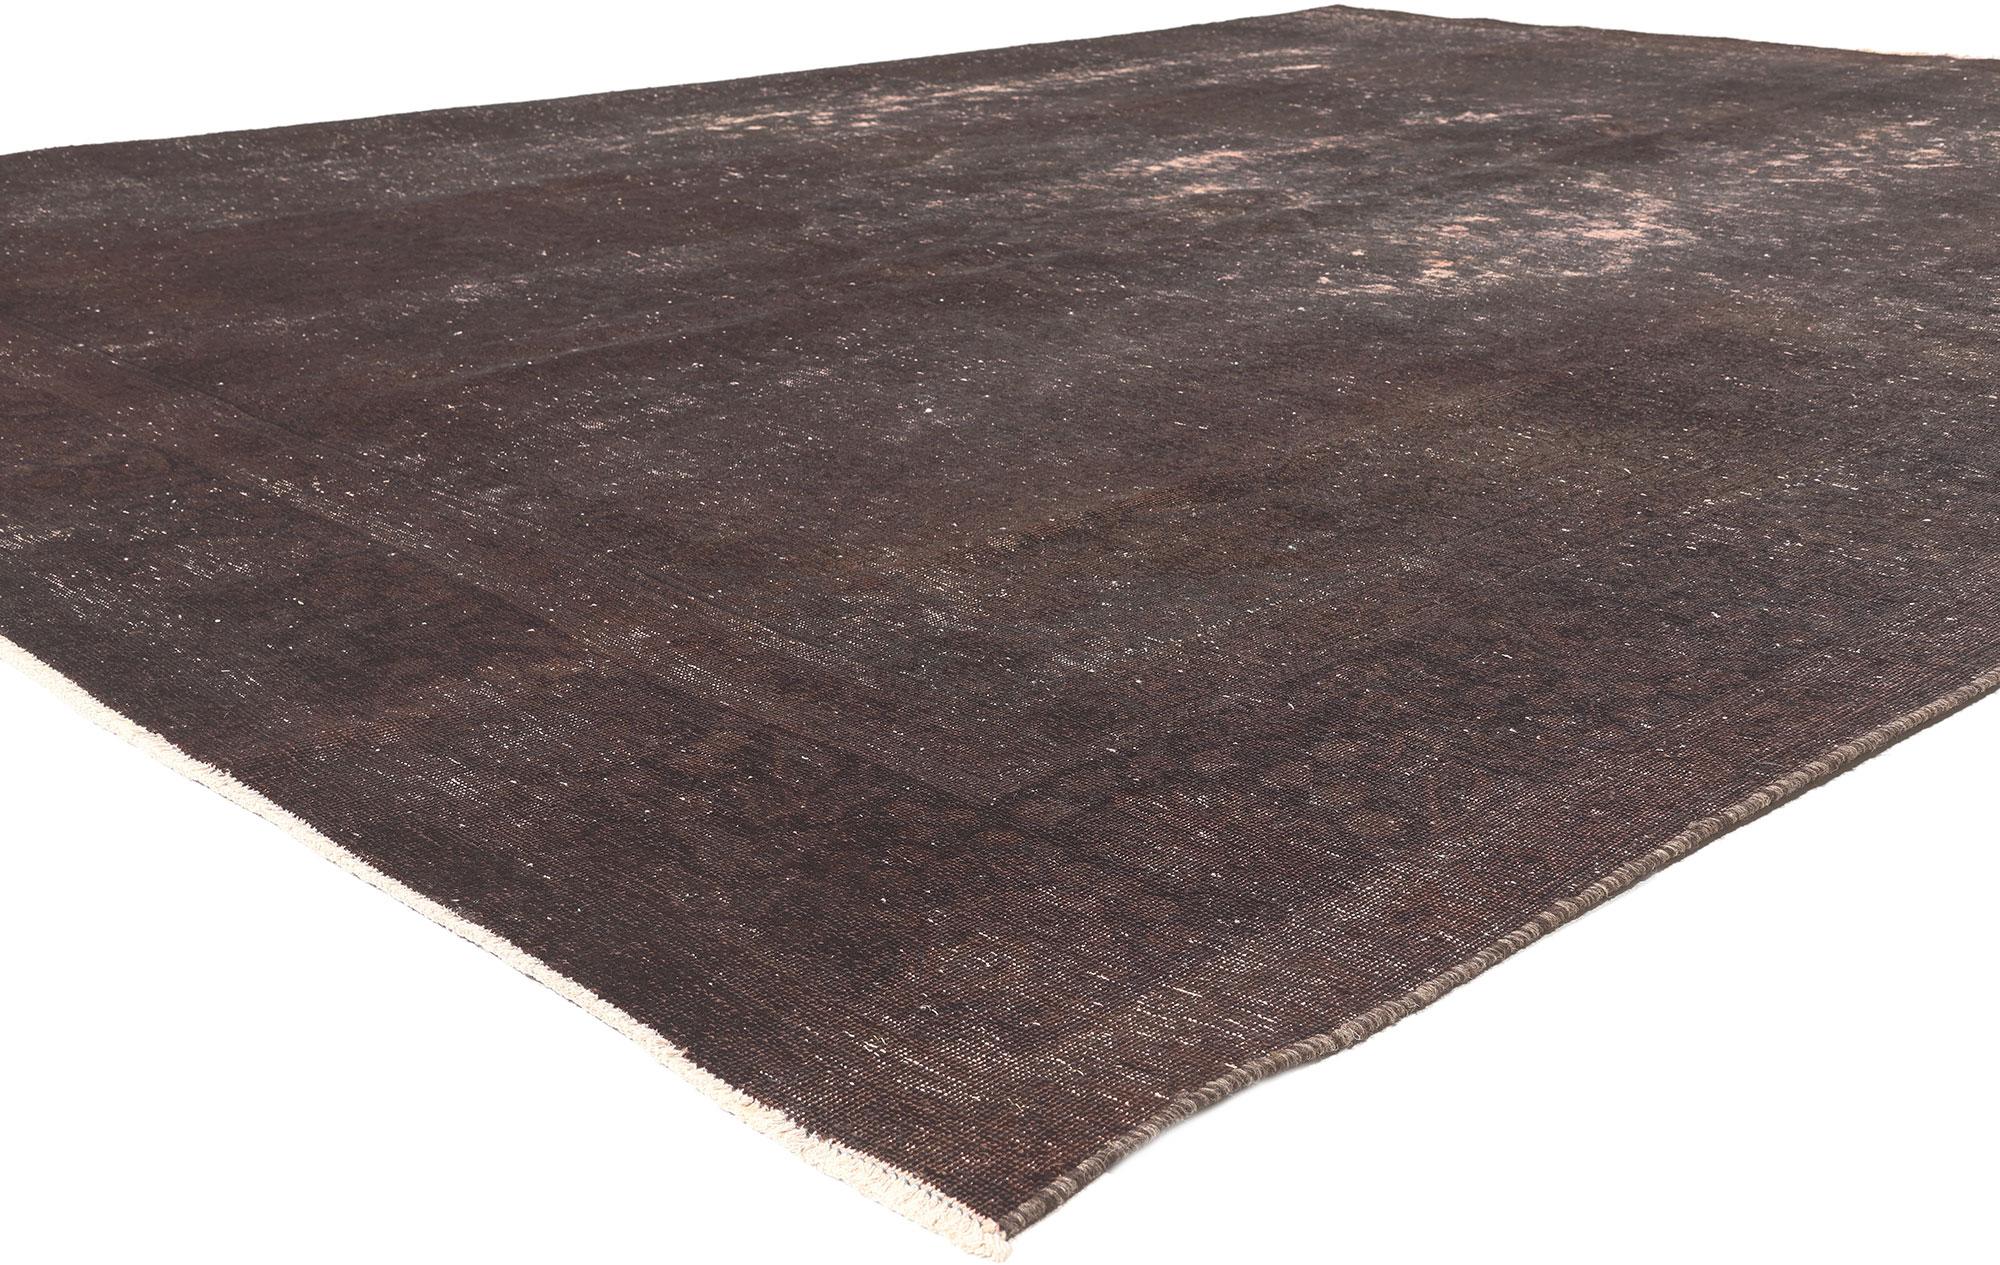 60694 Vintage Turkish Overdyed Rug, 09’09 x 12’09. 
Harmony of definition and raw allure converges with luxe utilitarian in this hand knotted wool vintage Turkish overdyed rug, transcending conventional design boundaries with historical richness and